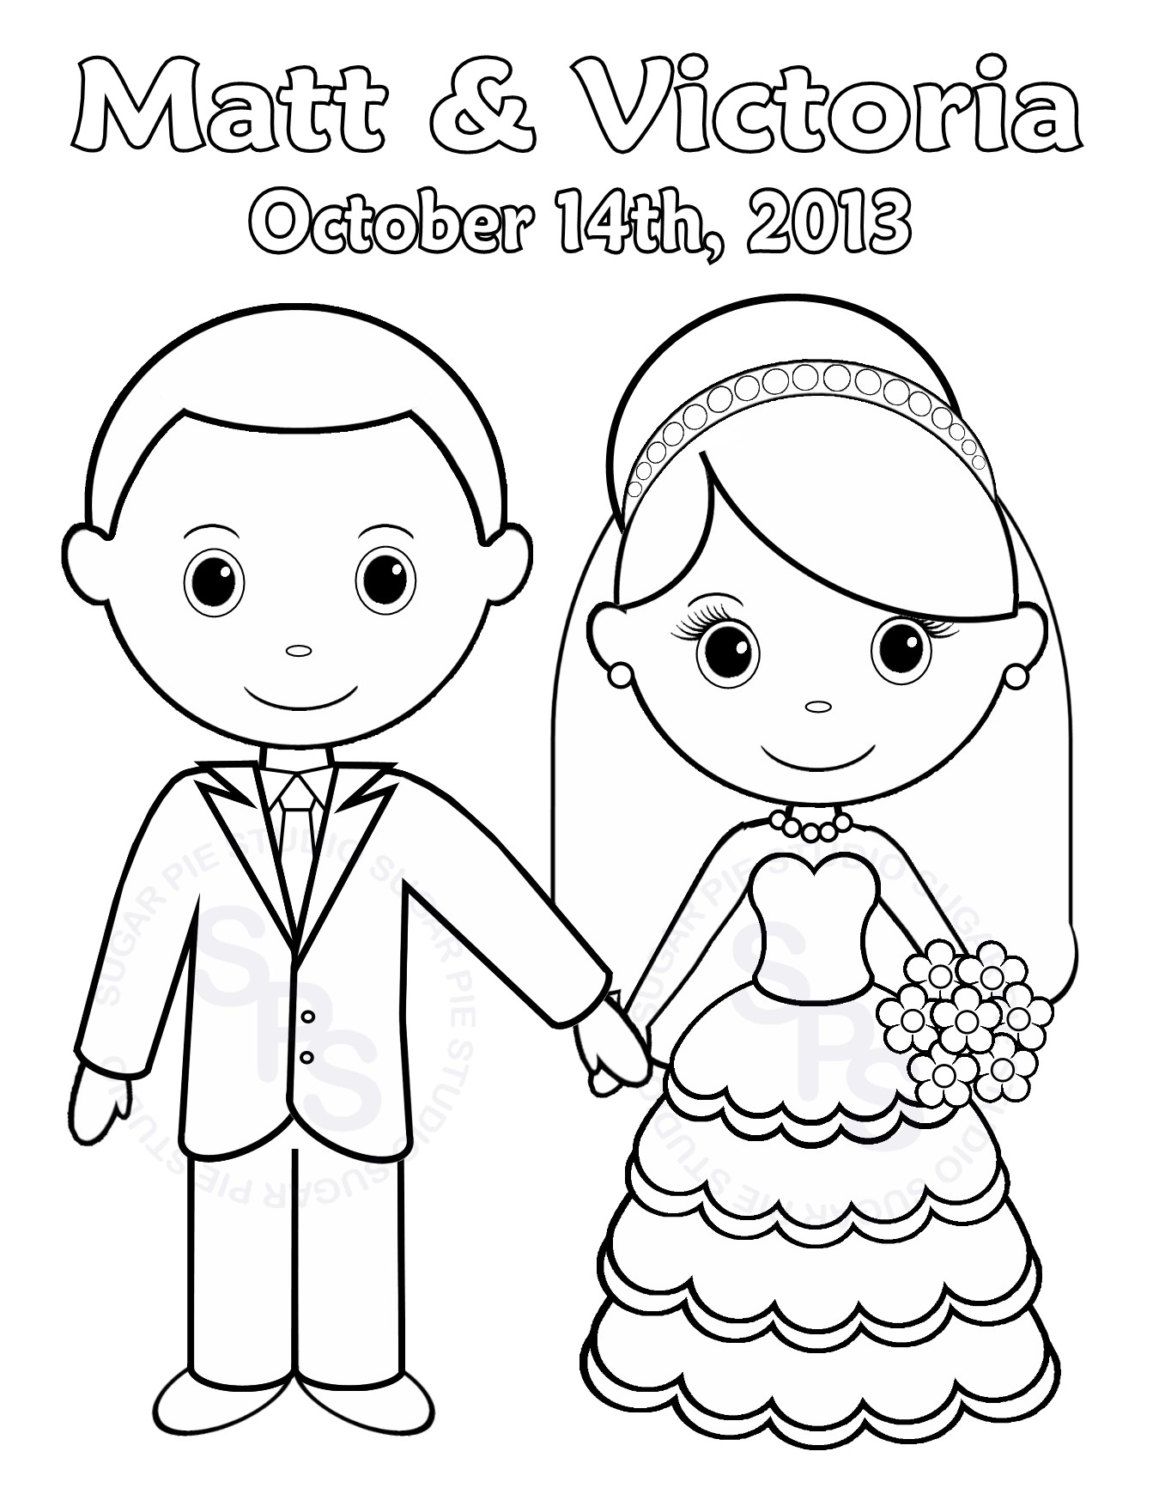 Free Wedding Coloring Pages Image 17 Human Category - Gianfreda.net